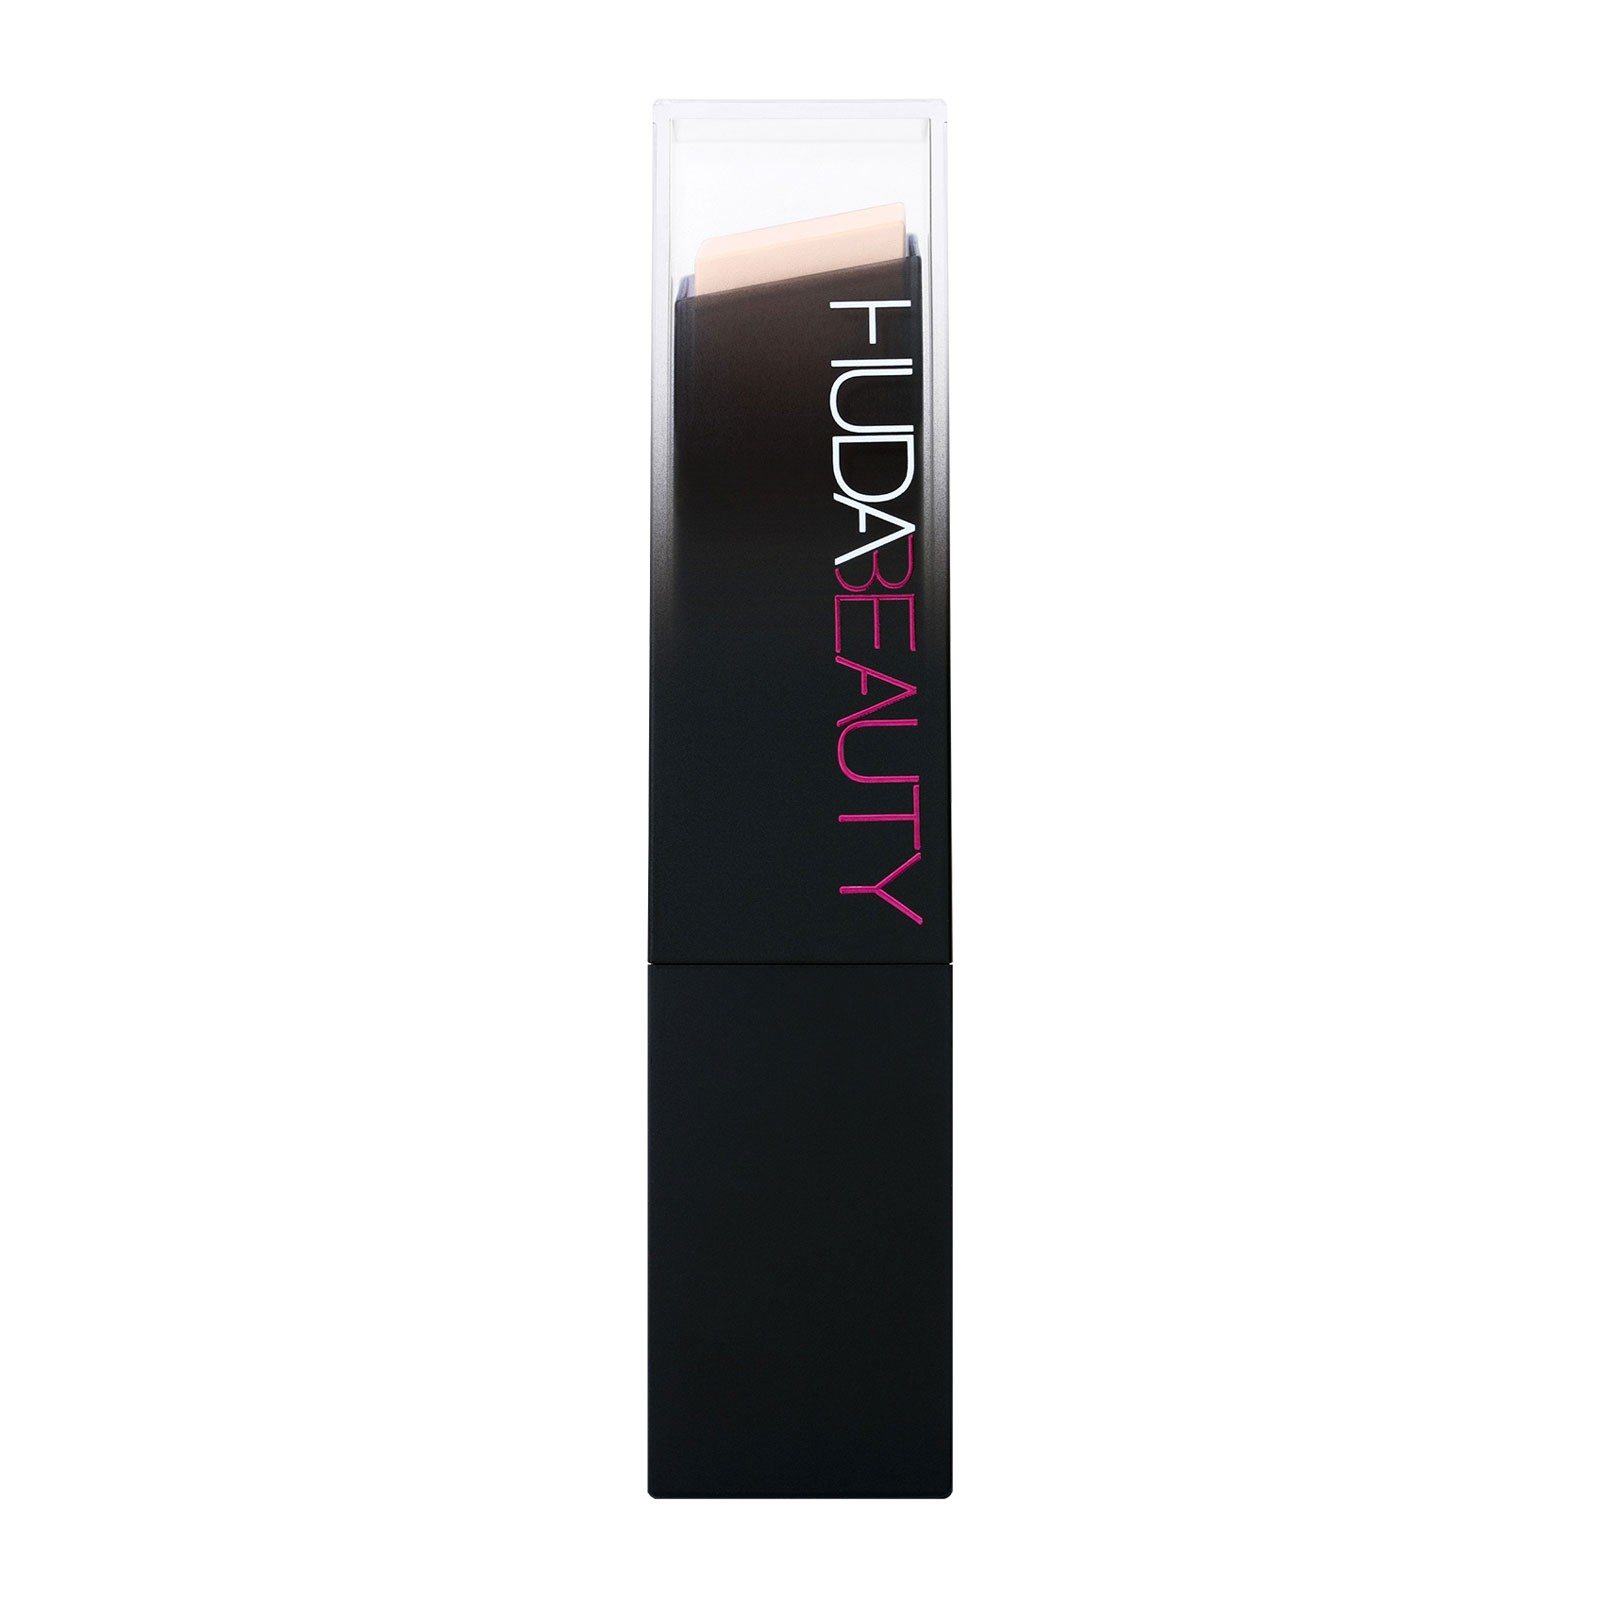 Huda Beauty #fauxfilter Skin Finish Buildable Coverage Foundation Stick